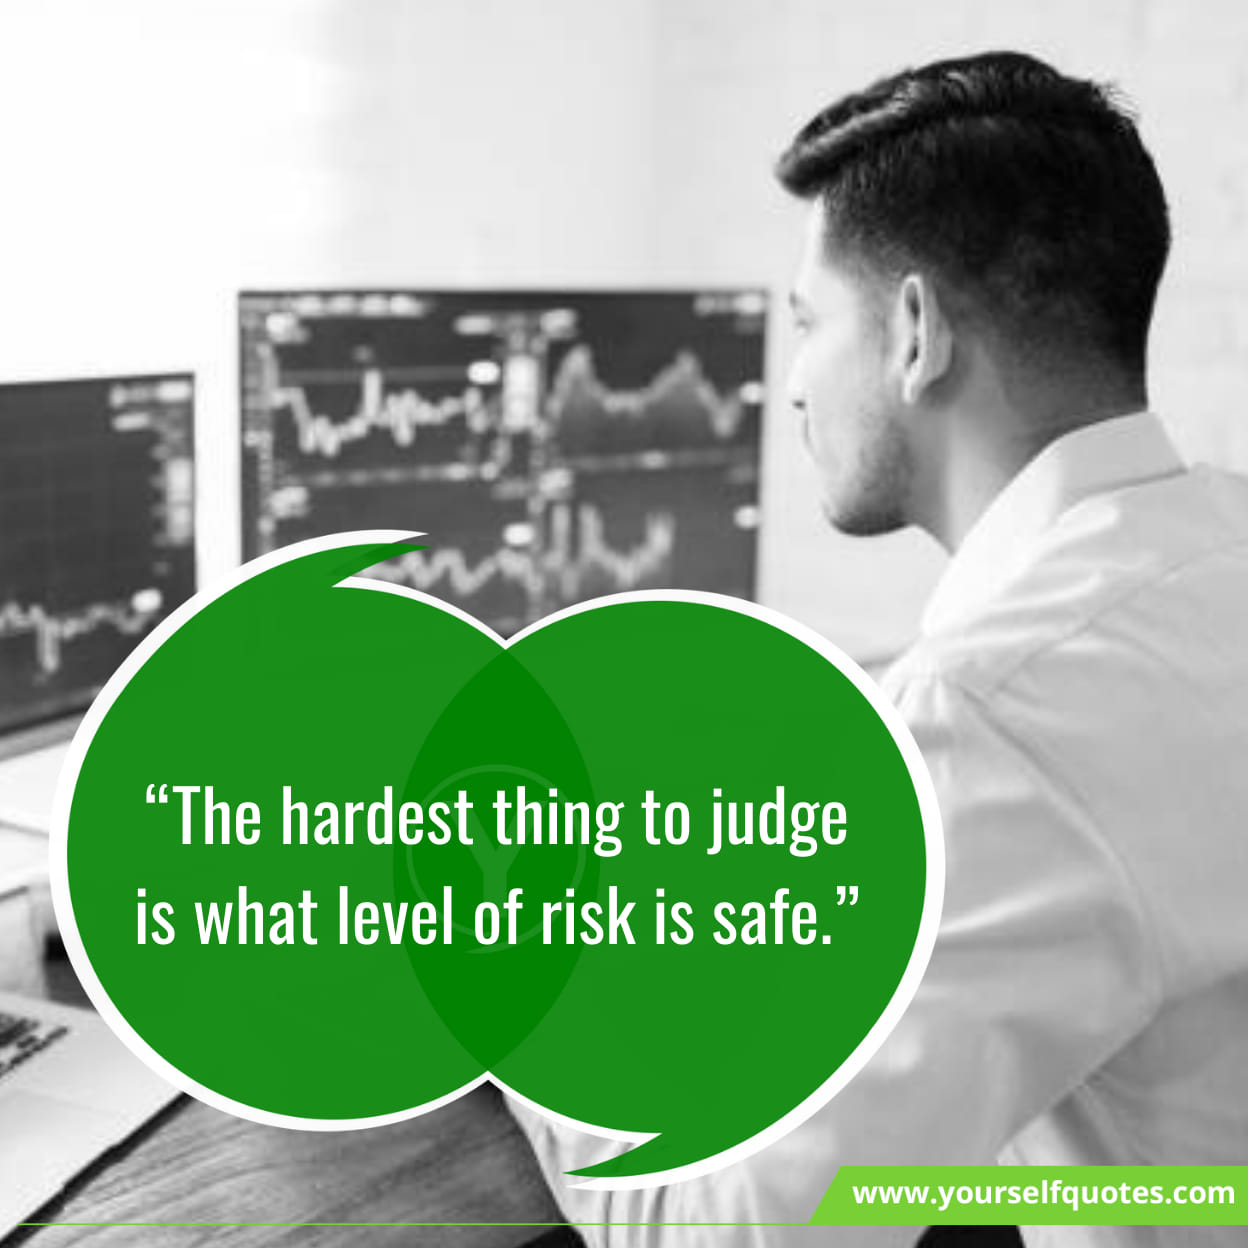 Inspirational Trading Quotes